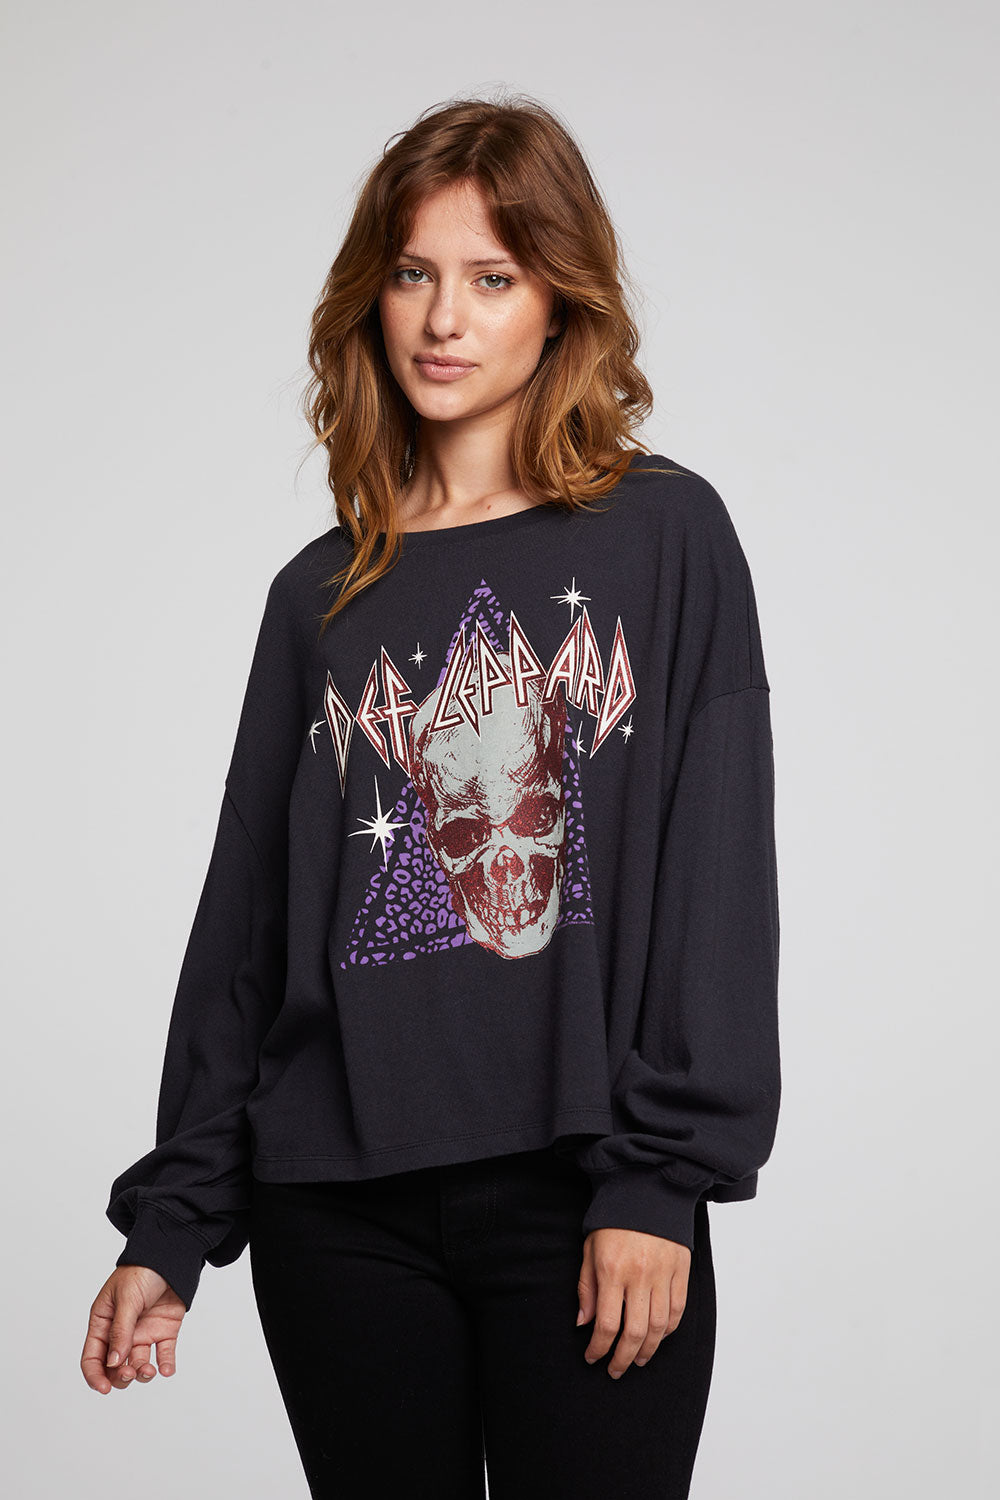 Def Lep Skull Top by Chaser